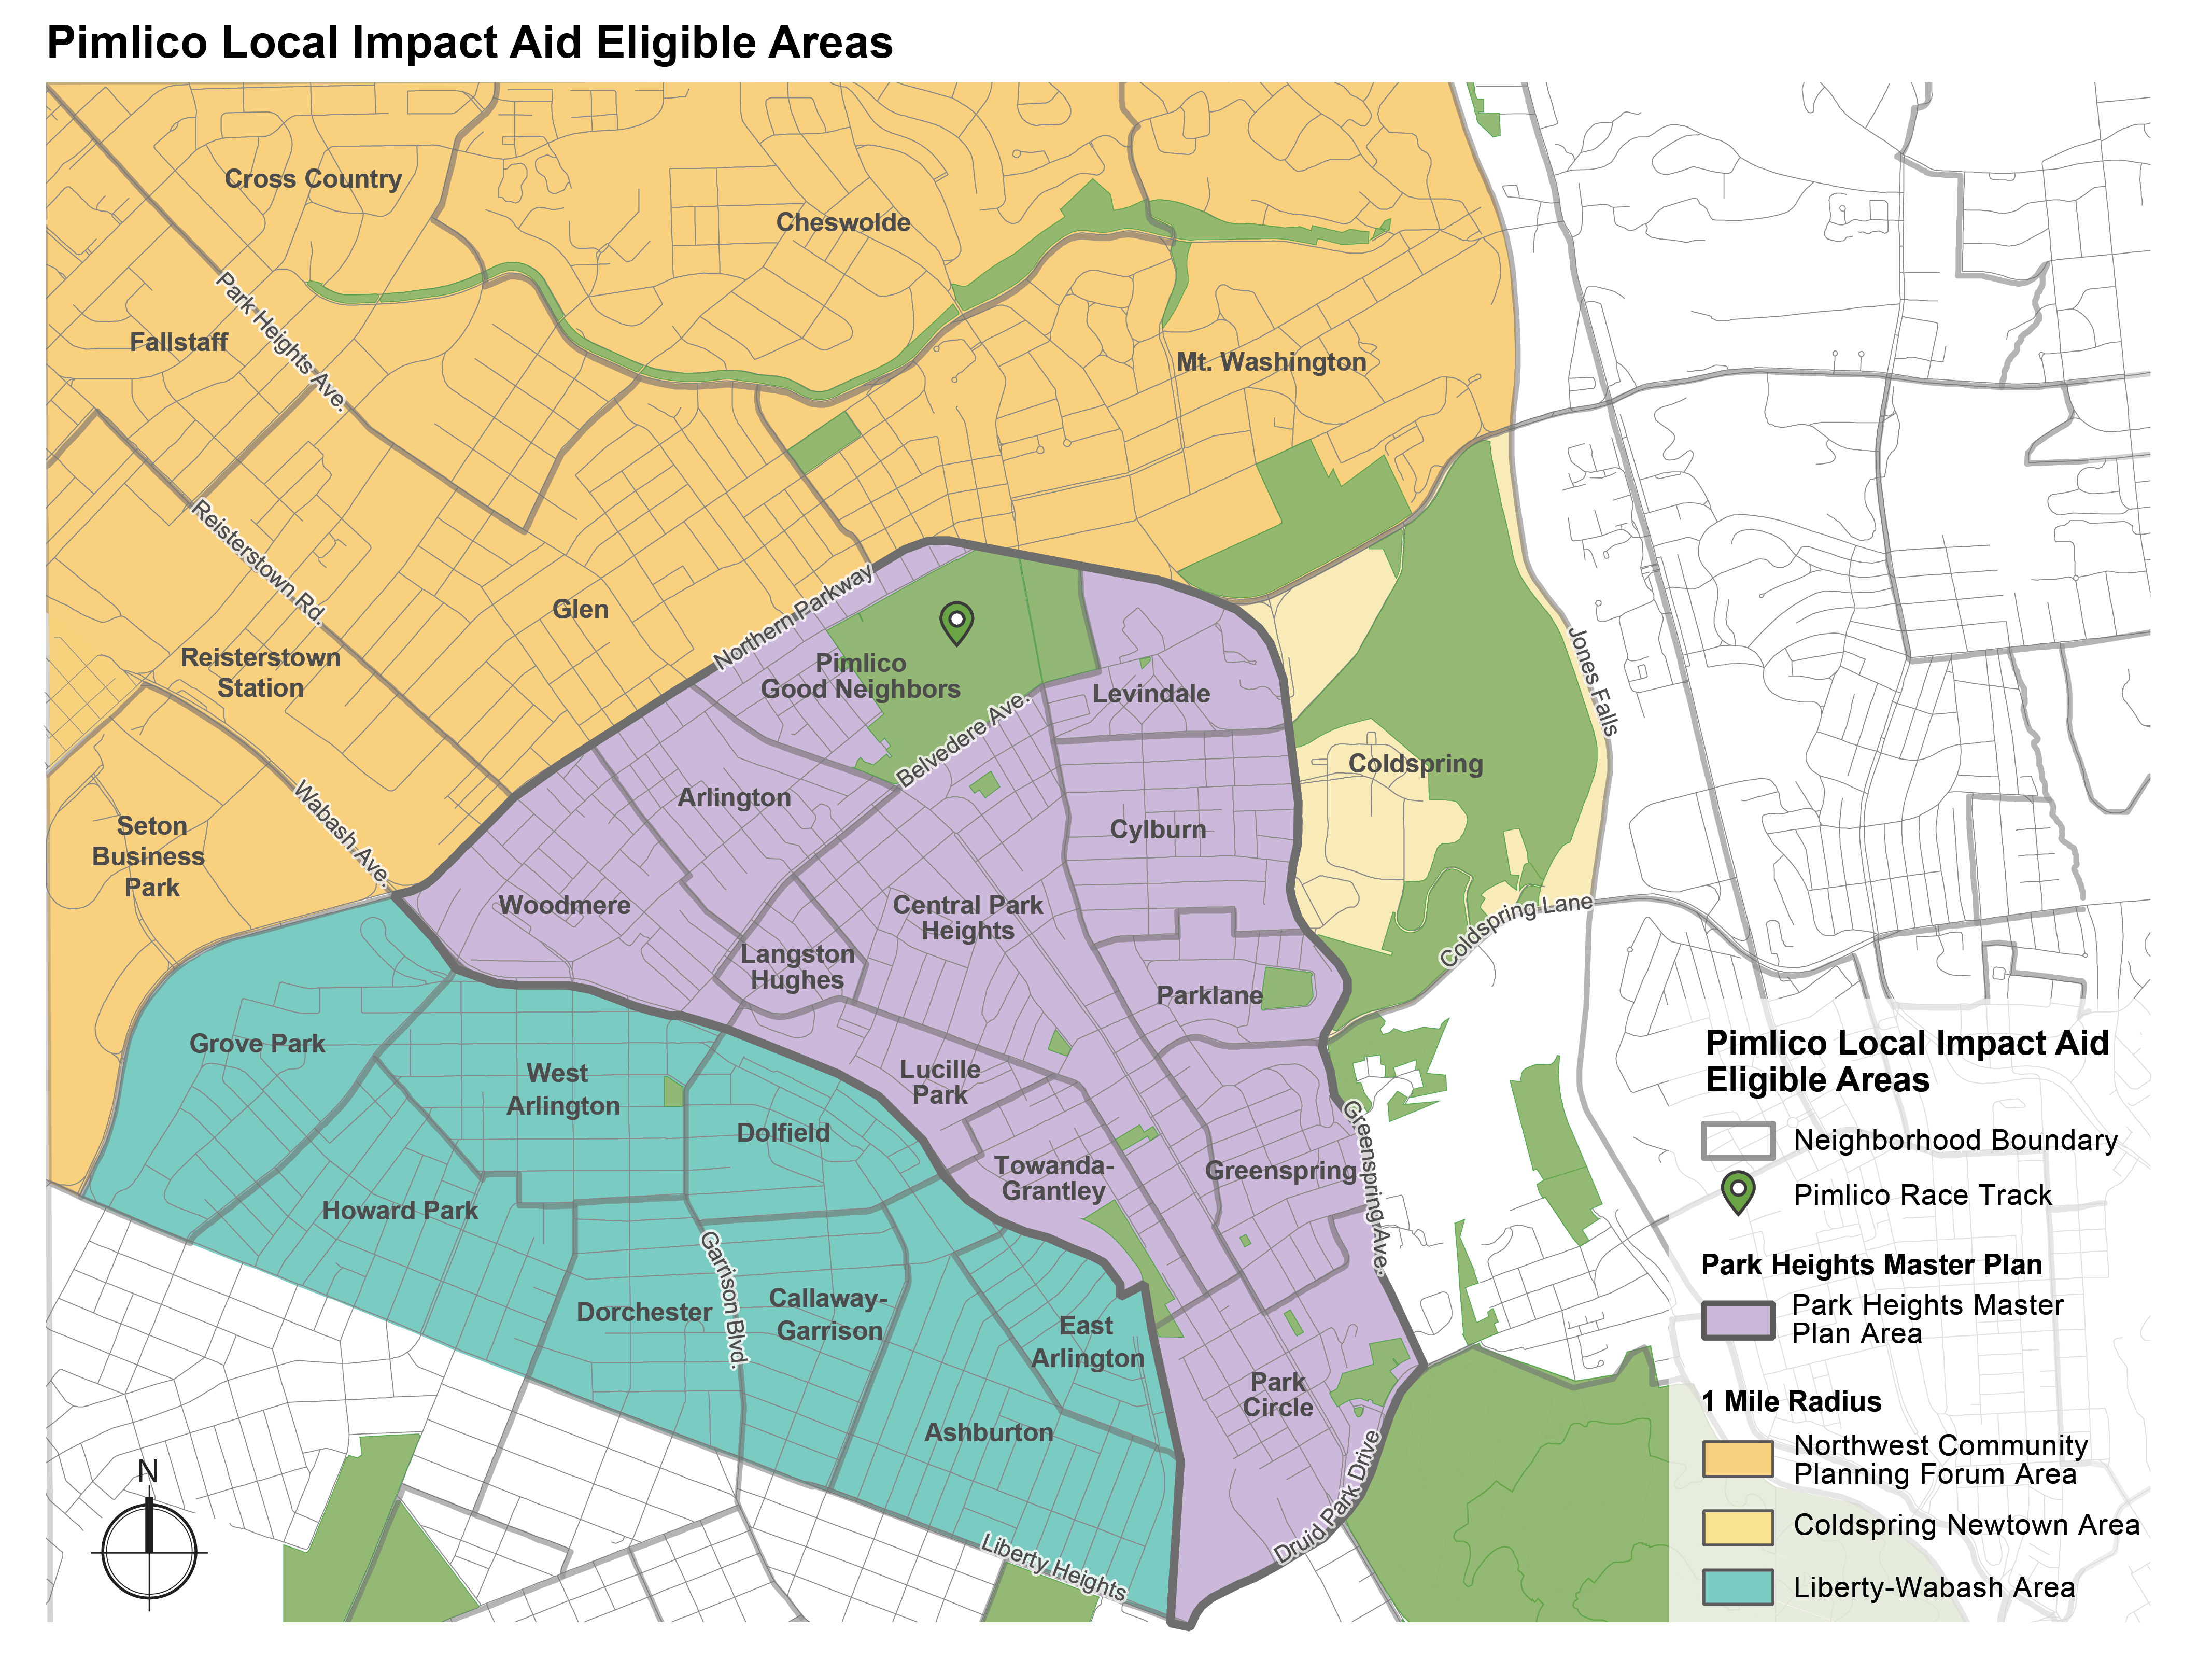 Map shows Park Heights and One Mile Radius neighborhoods